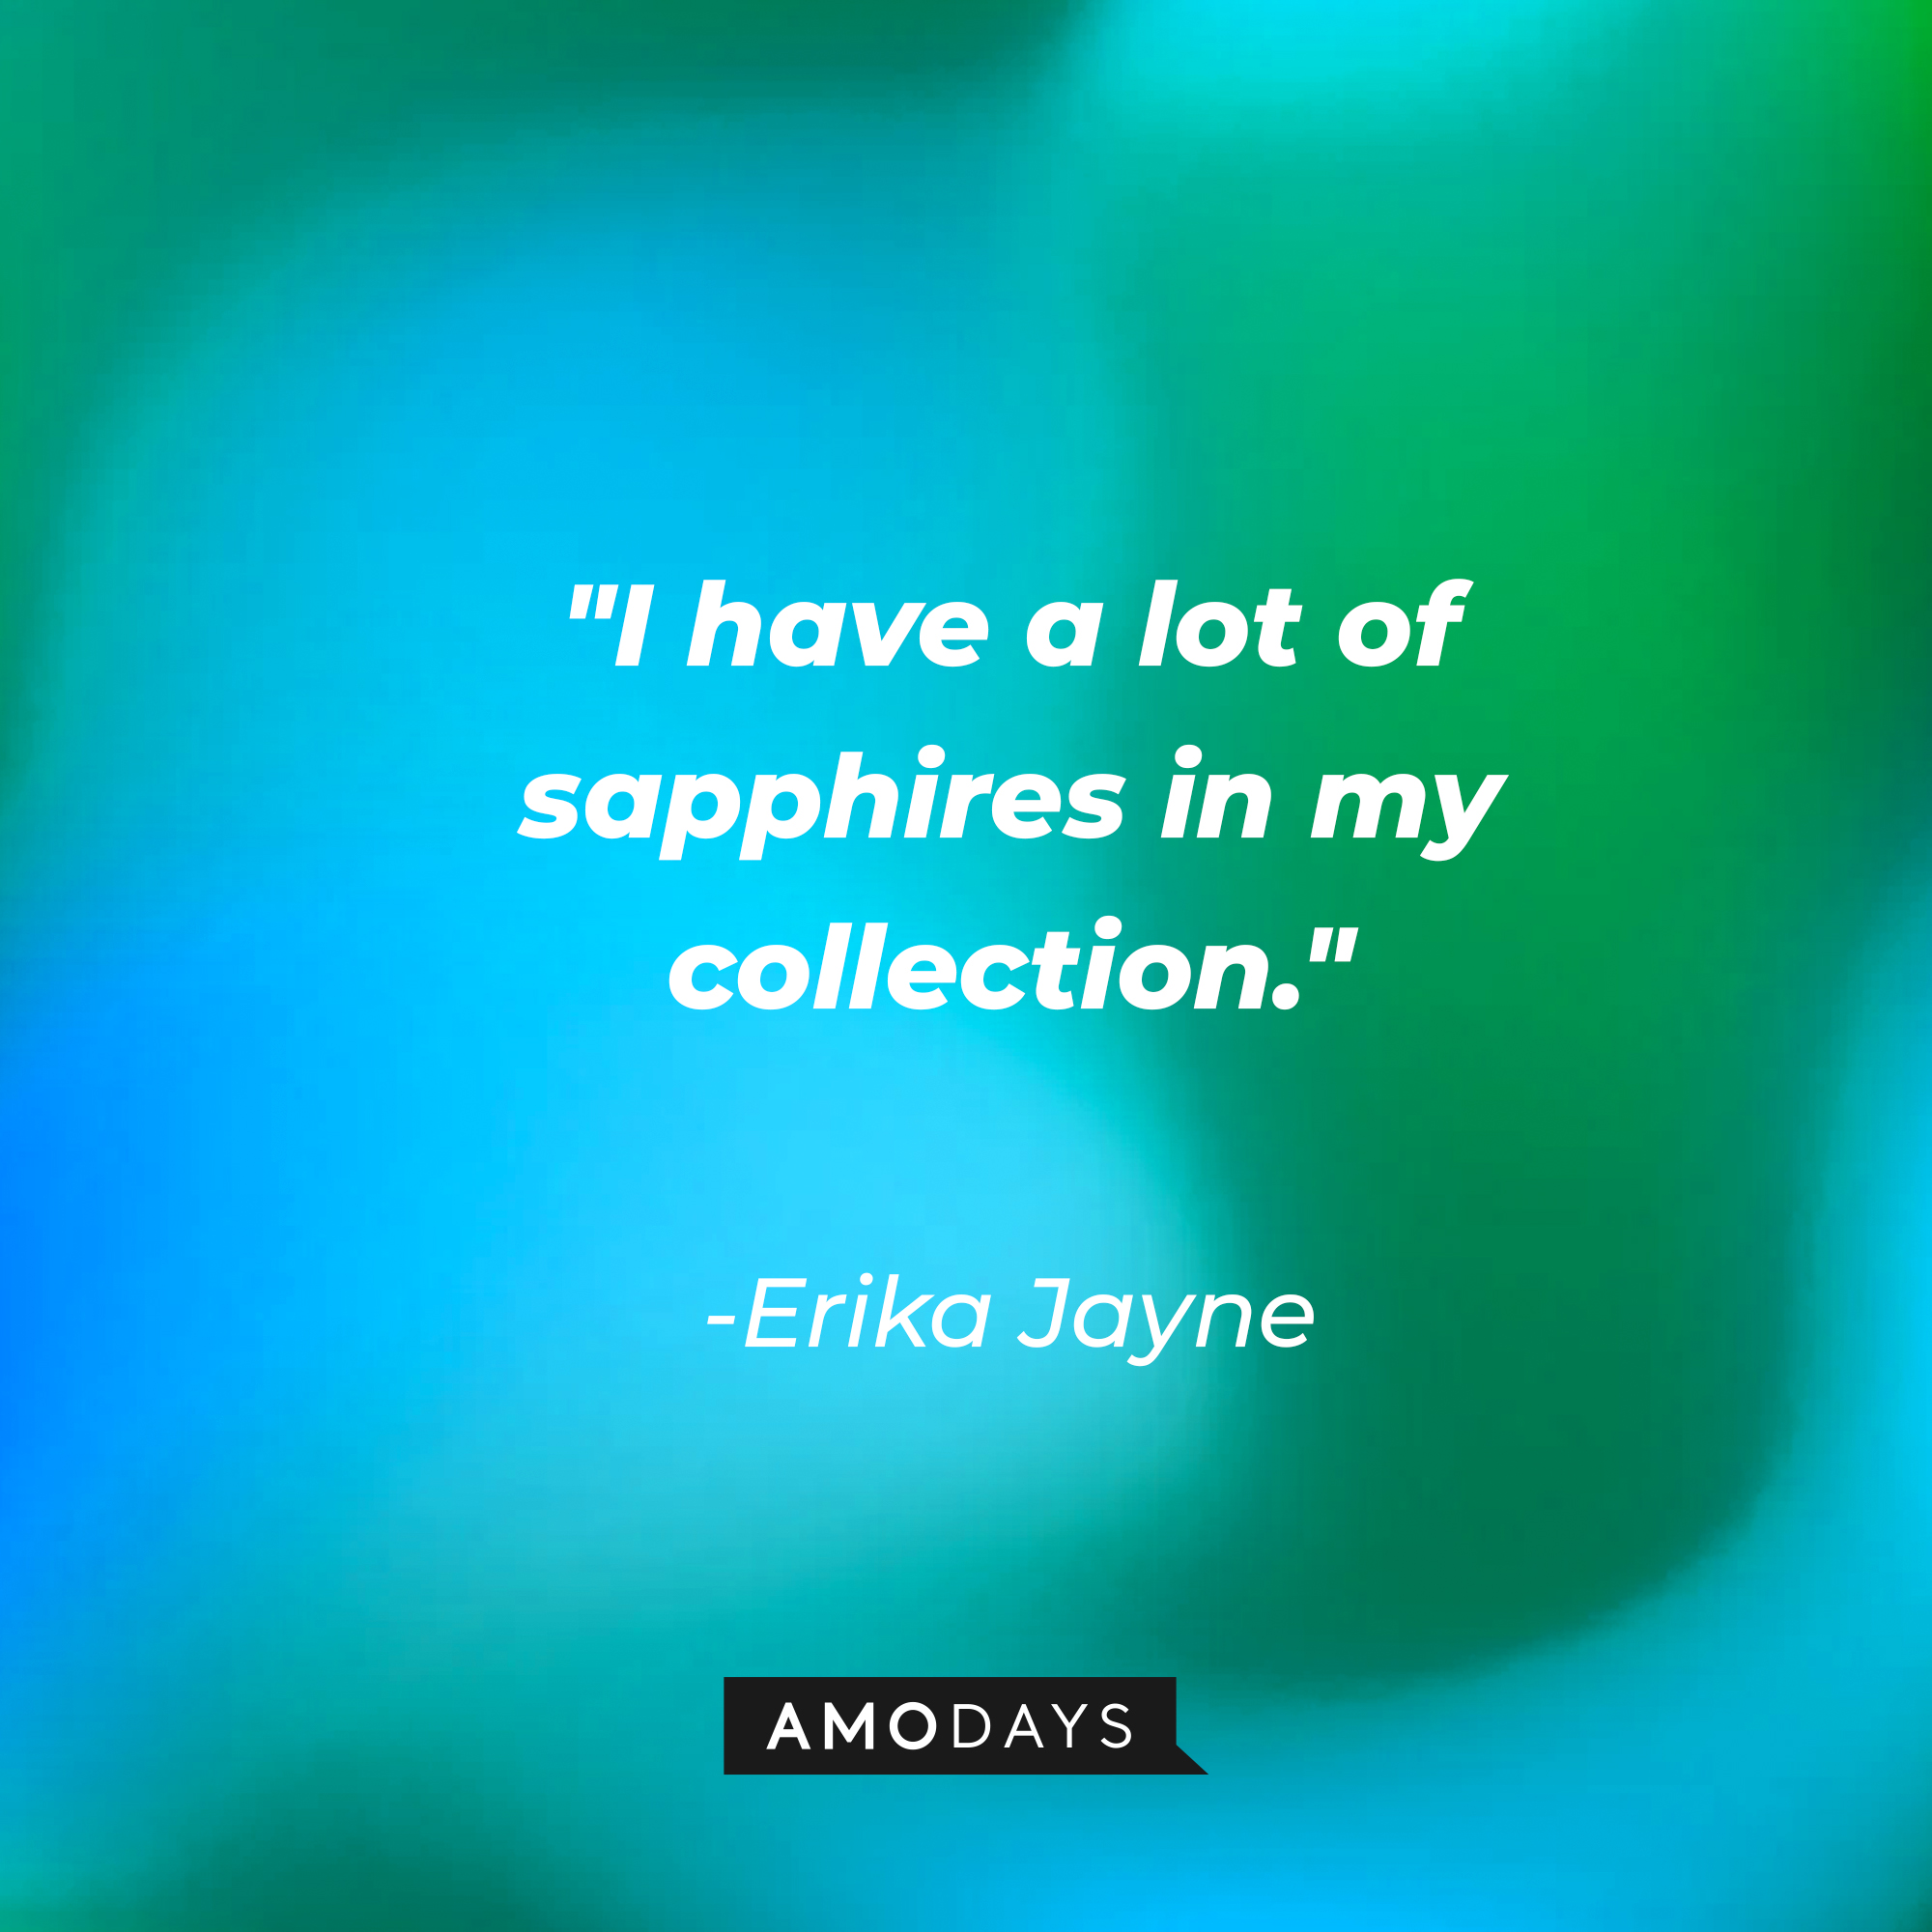 Erika Jayne’s quote: "I have a lot of sapphires in my collection." | Image: Amodays